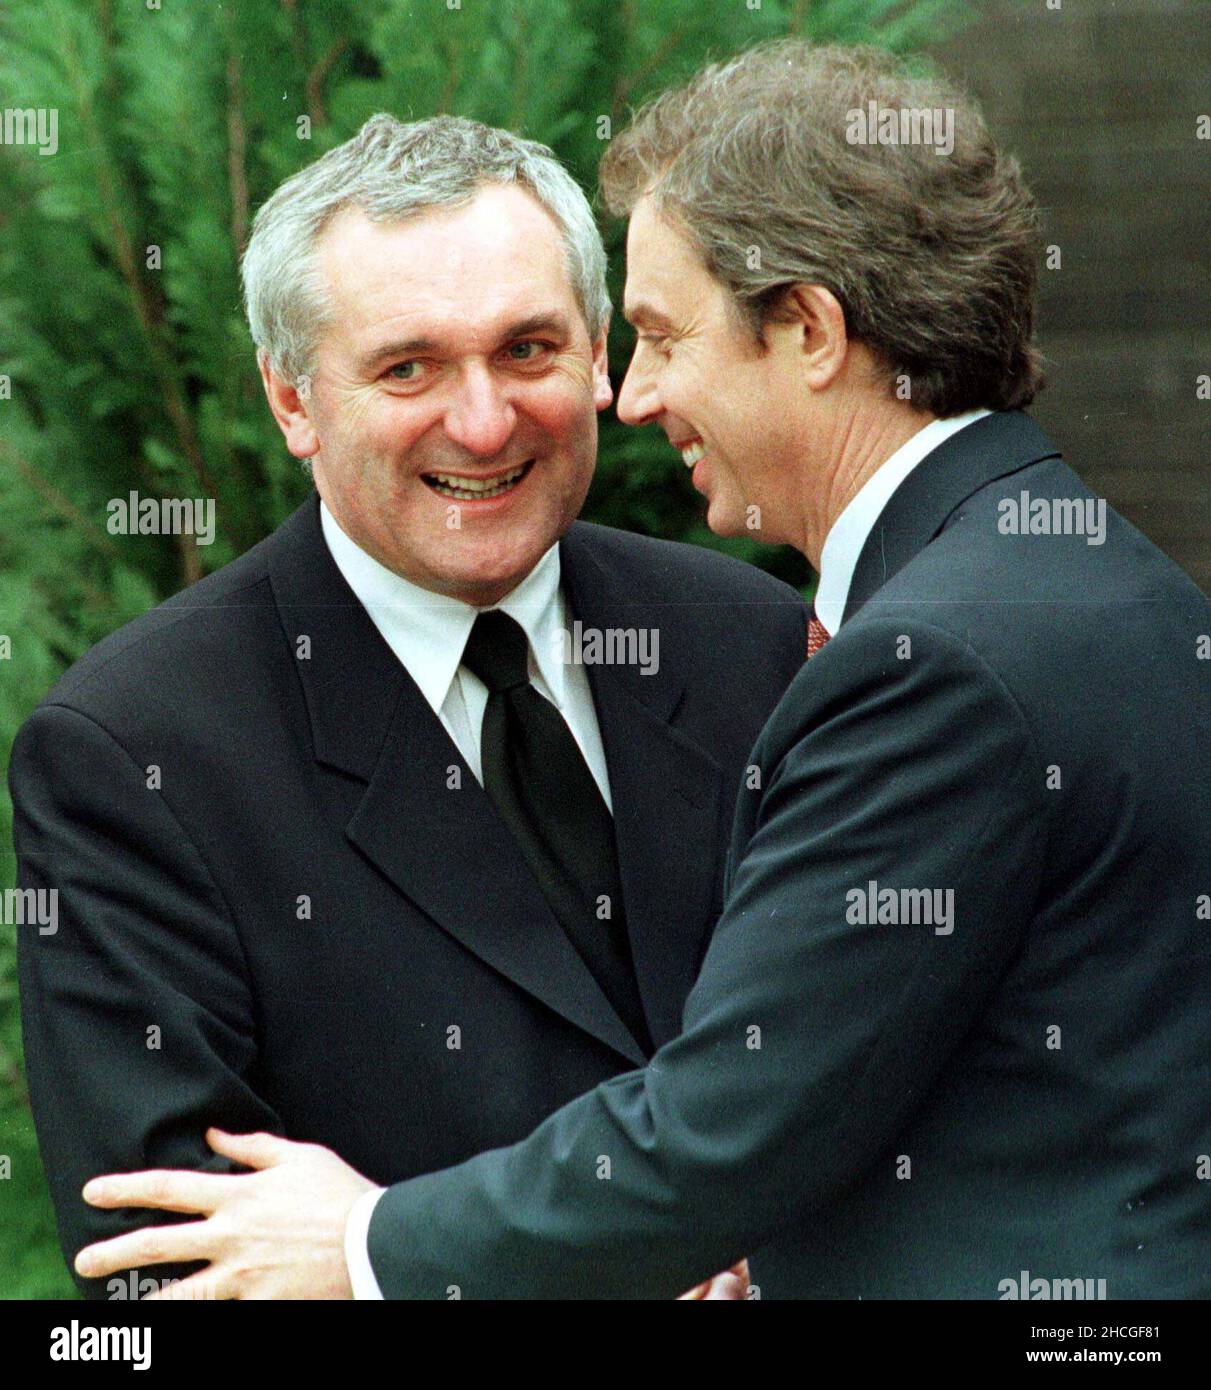 File photo dated 10/04/98 of the then Taoiseach Berie Ahern (left) and the then Prime Minister Tony Blair embracing after the announcement of the historic peace deal following a marathon session of talks at Stormont. Issue date: Wednesday December 29, 2021. Stock Photo